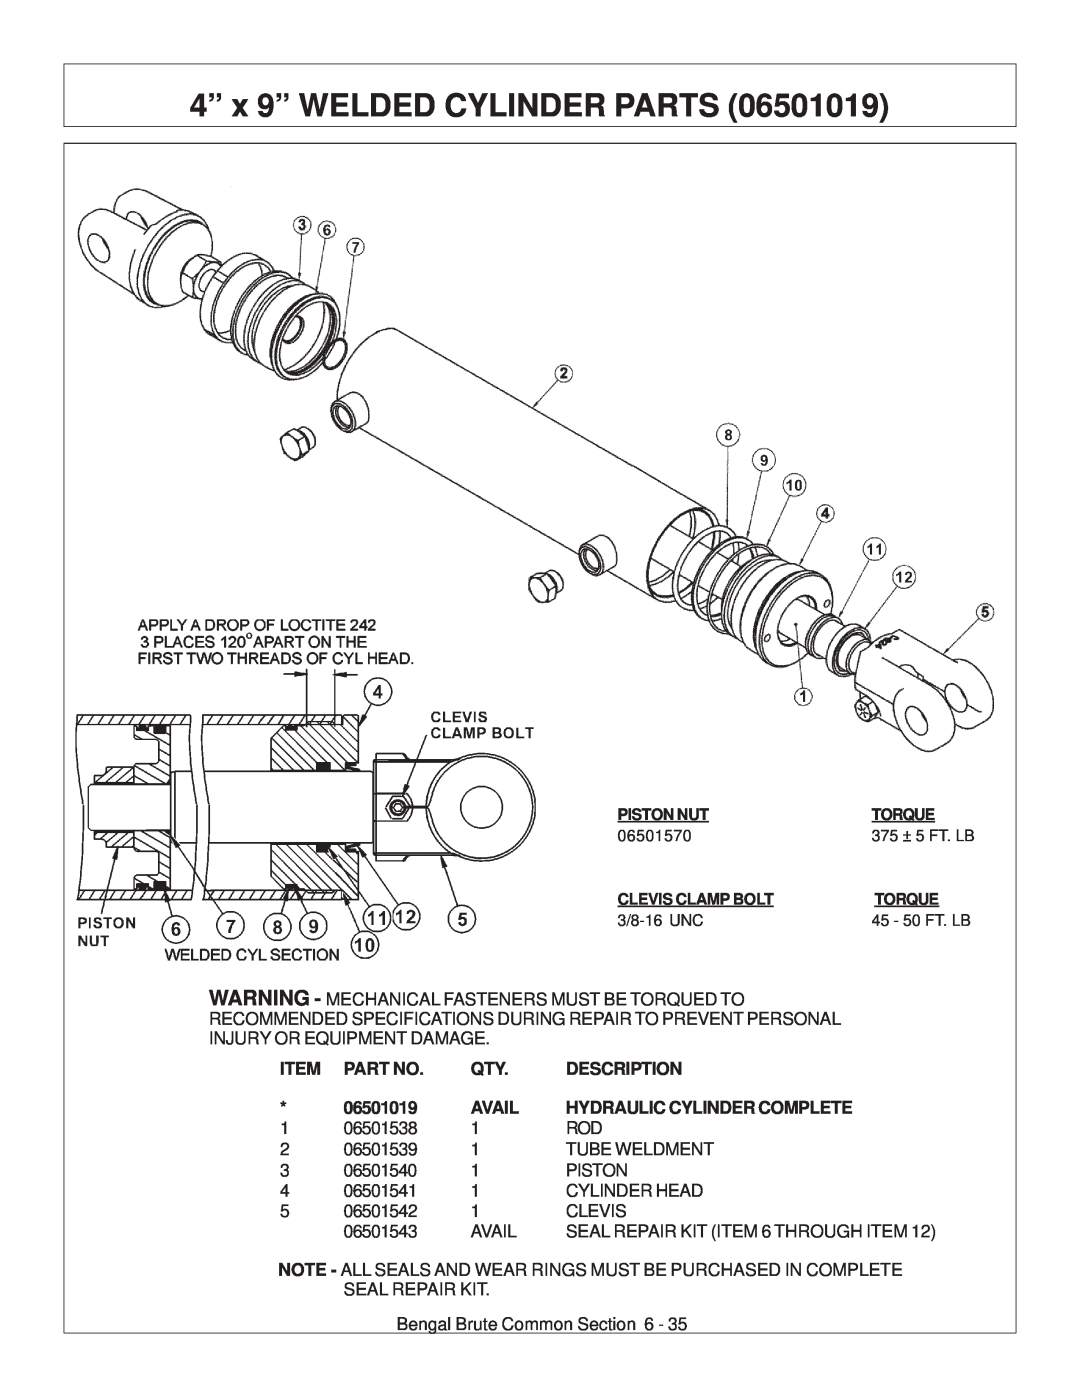 Tiger JD 62-6420 manual 4” x 9” WELDED CYLINDER PARTS, Description, 06501019, Avail, Hydraulic Cylinder Complete 